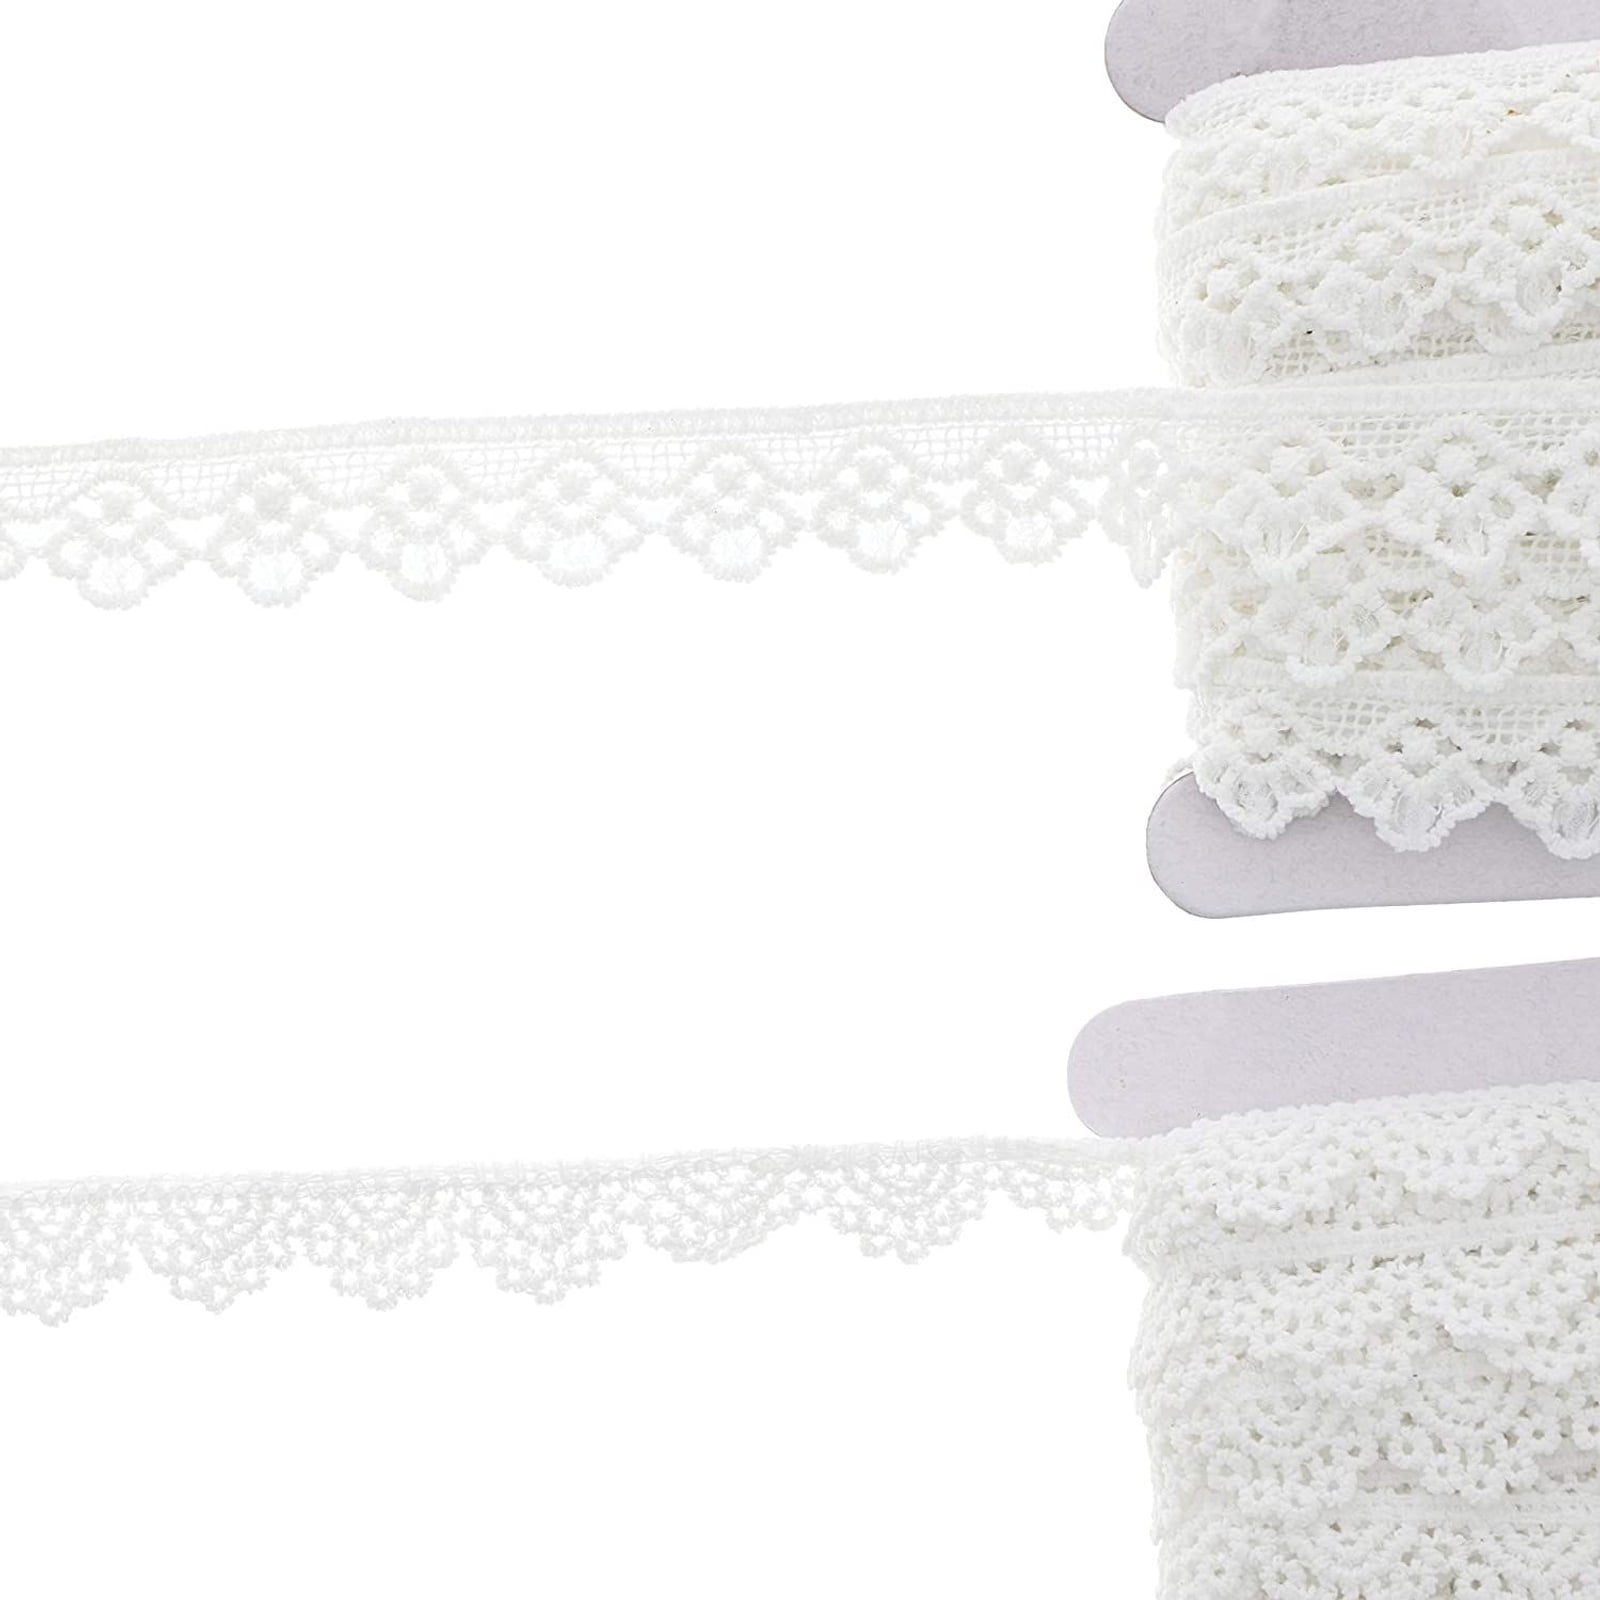 Trim 10yd Vintage Craft Lace Crochet Applique Edge Embroidered DIY Ribbon Sewing 